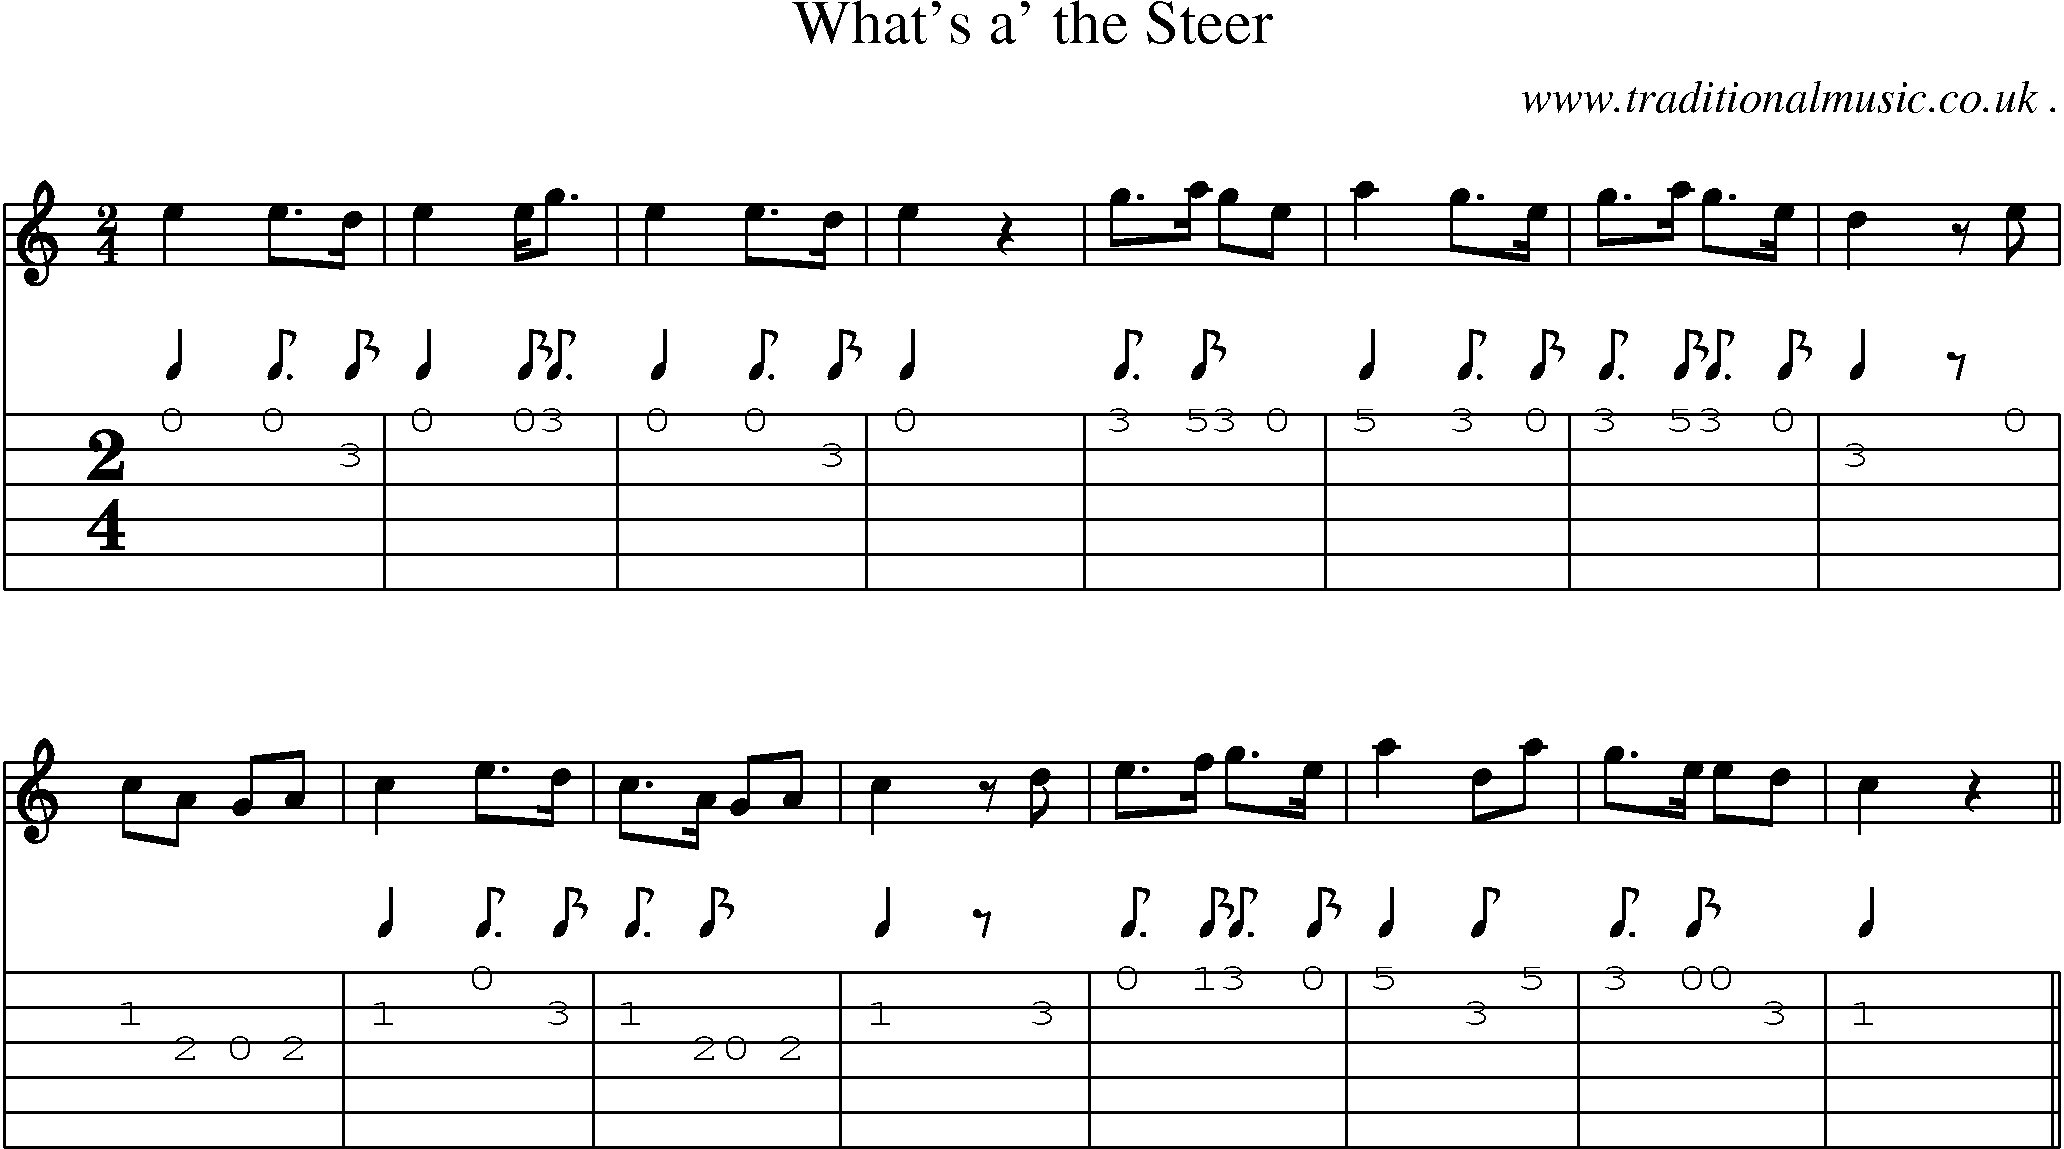 Sheet-music  score, Chords and Guitar Tabs for Whats A The Steer